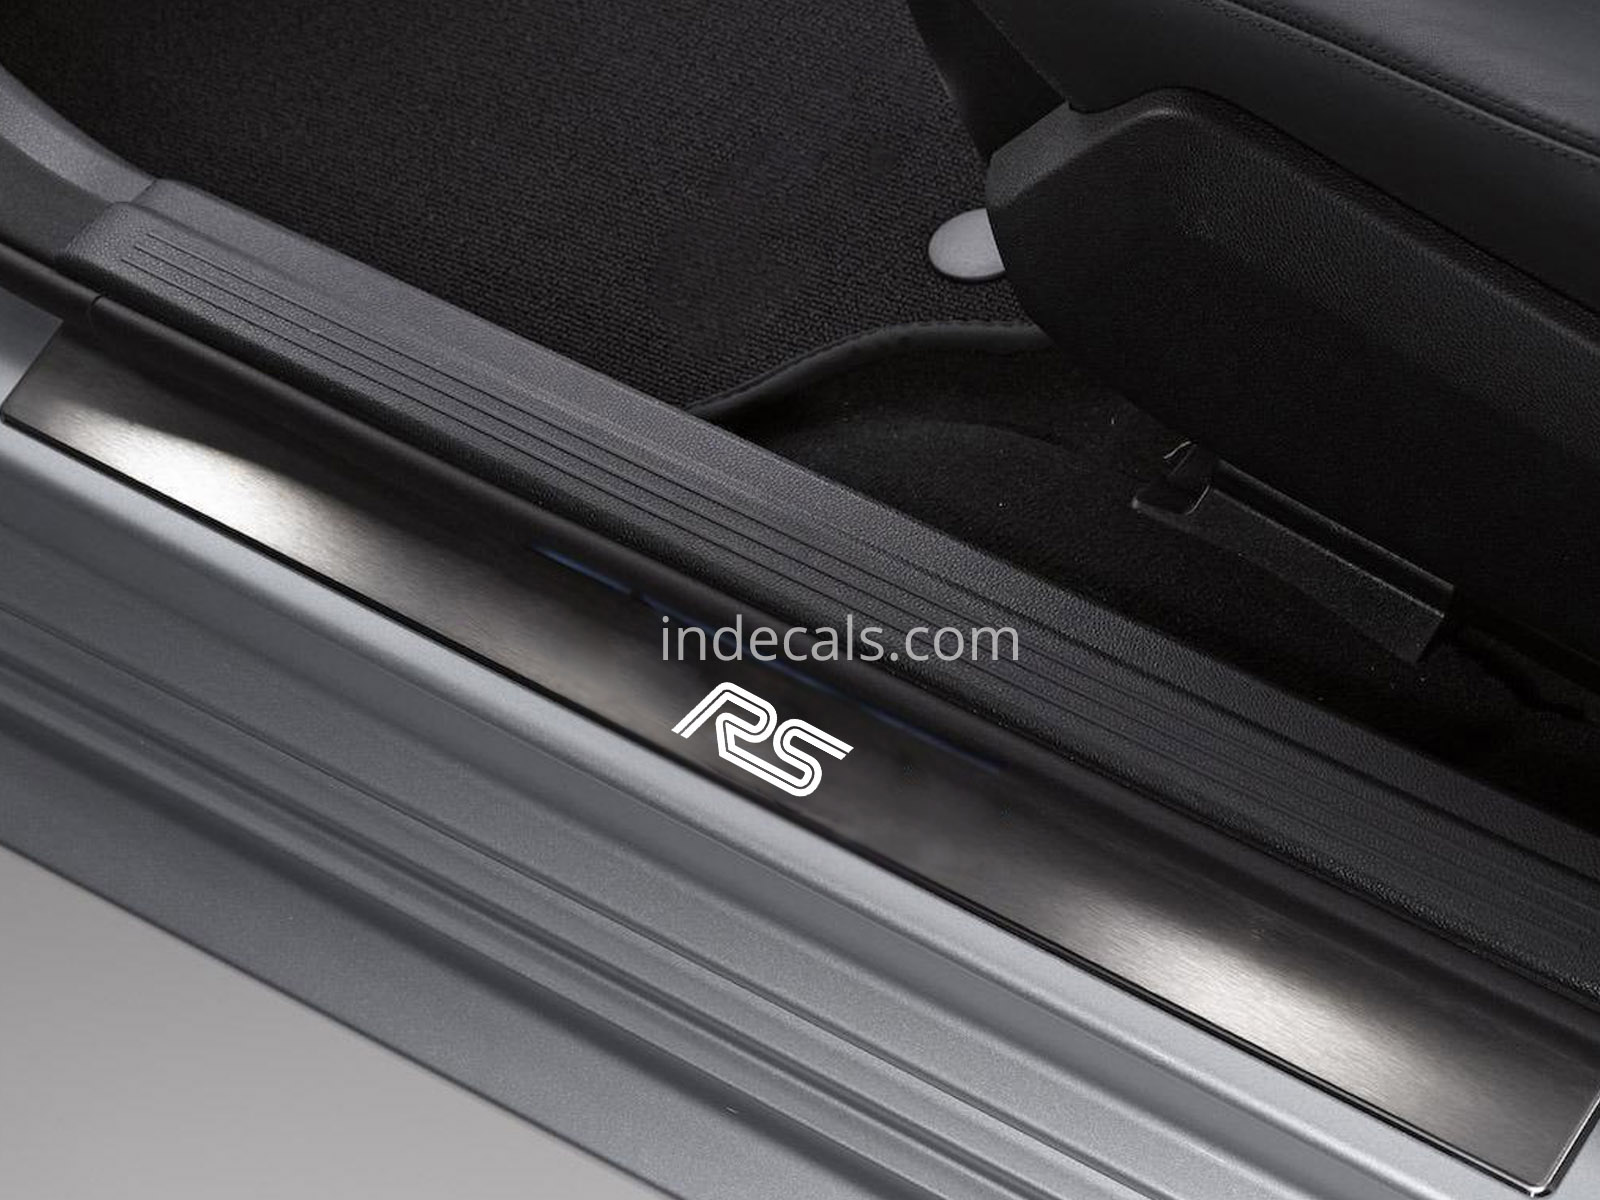 6 x Ford RS Stickers for Door Sills - White